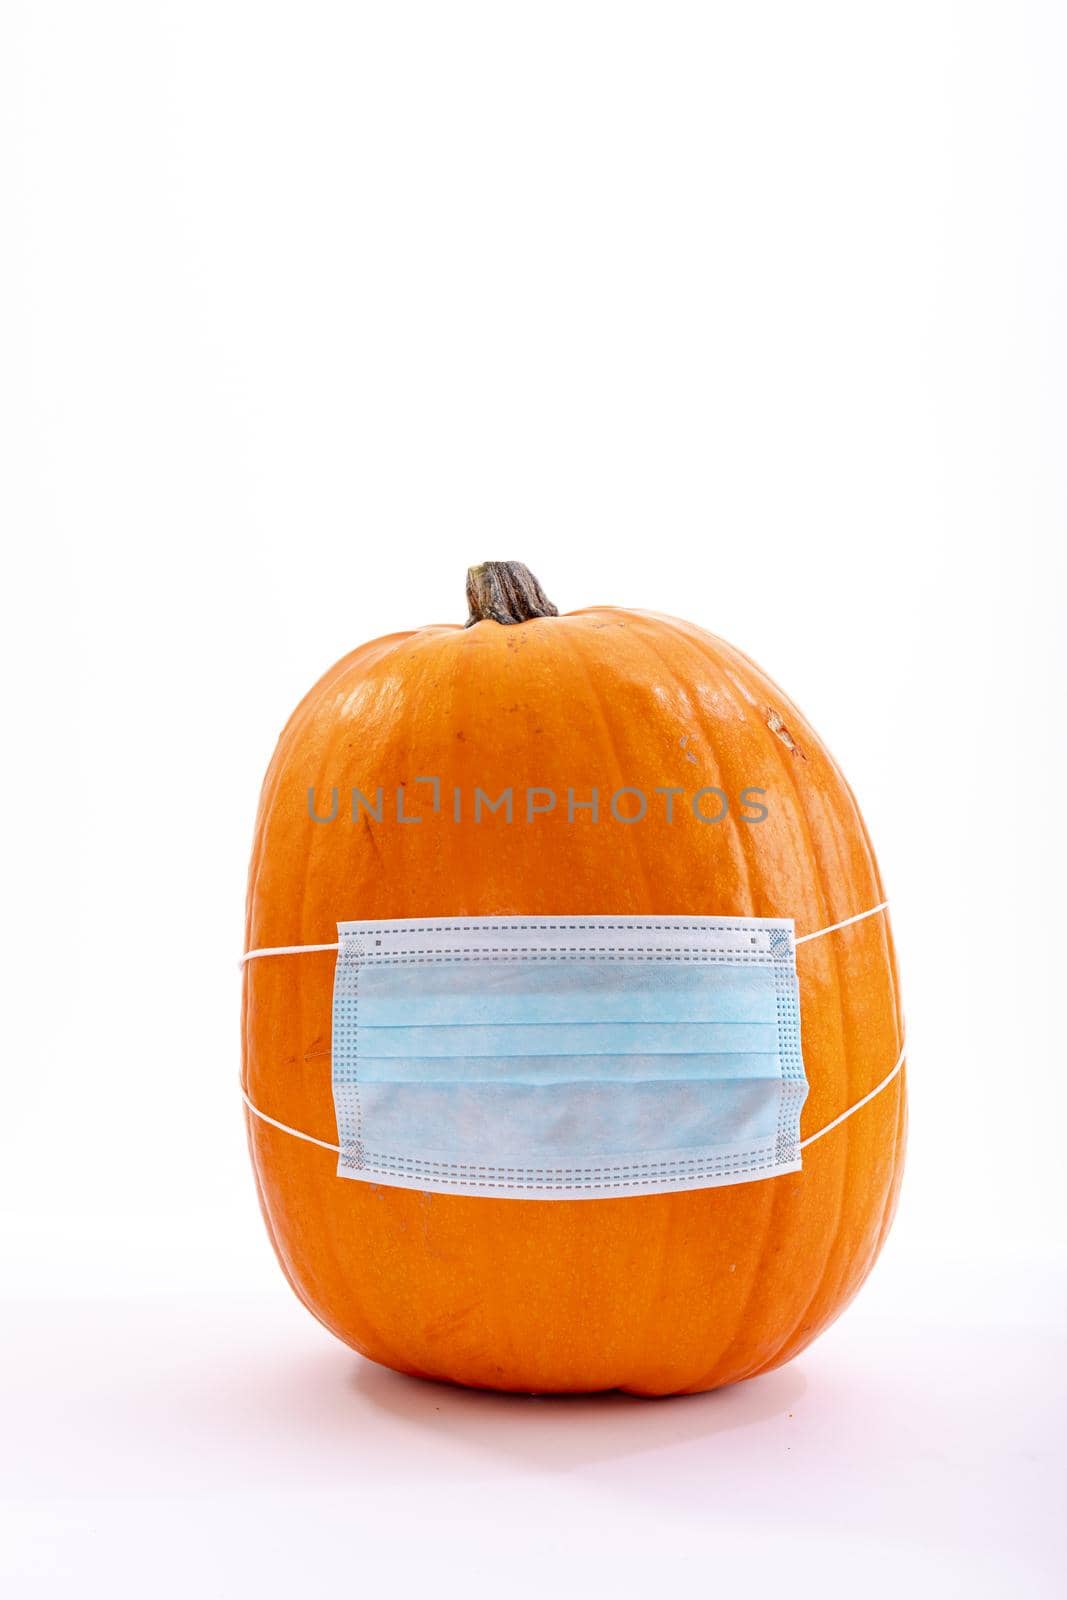 Halloween pumpkin with face mask on white background by Wavebreakmedia